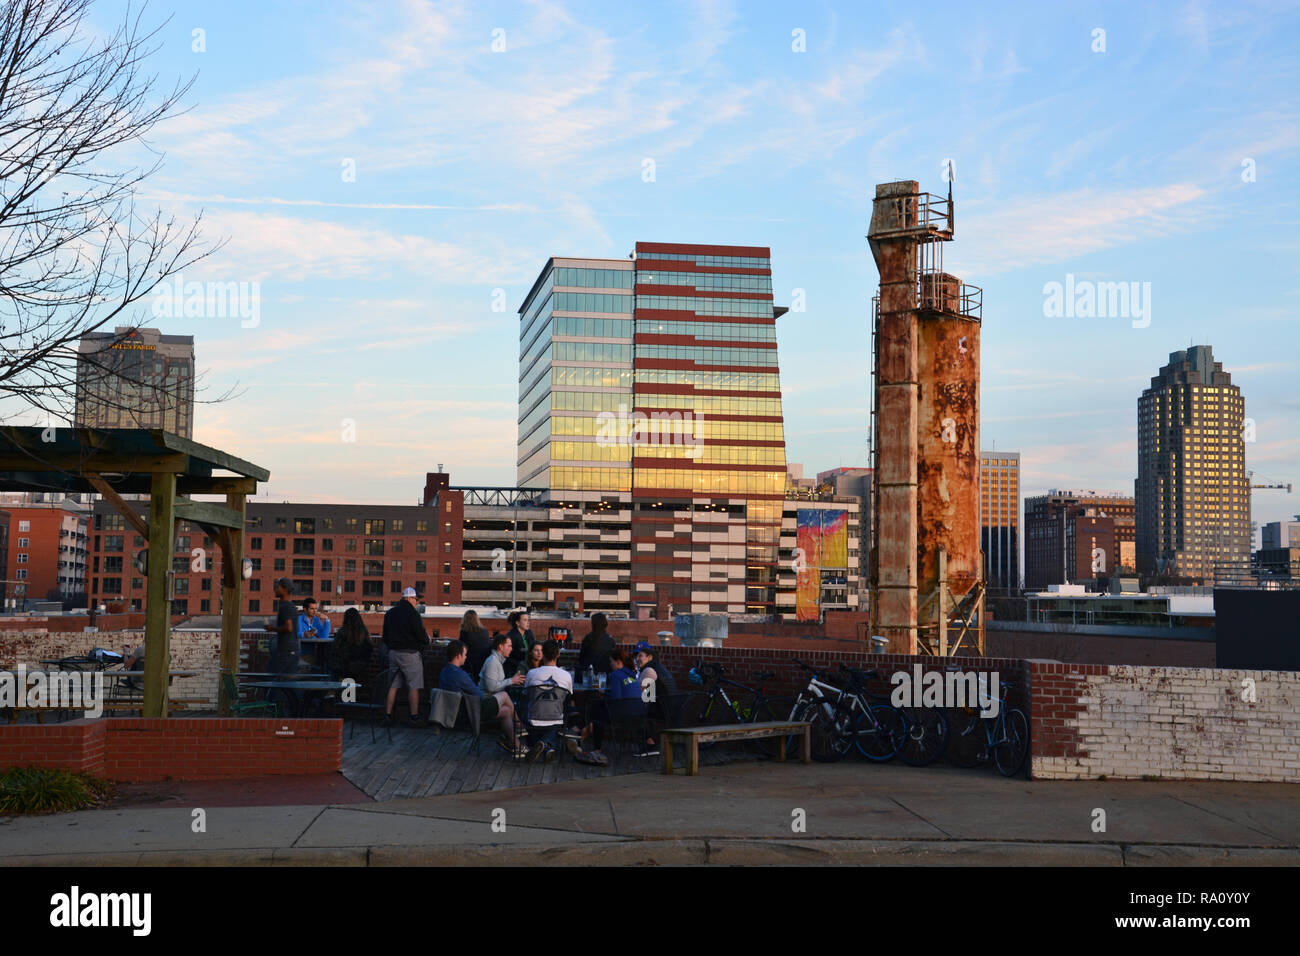 The Raleigh Nc Skyline Is In The Background Of The Beer Garden At